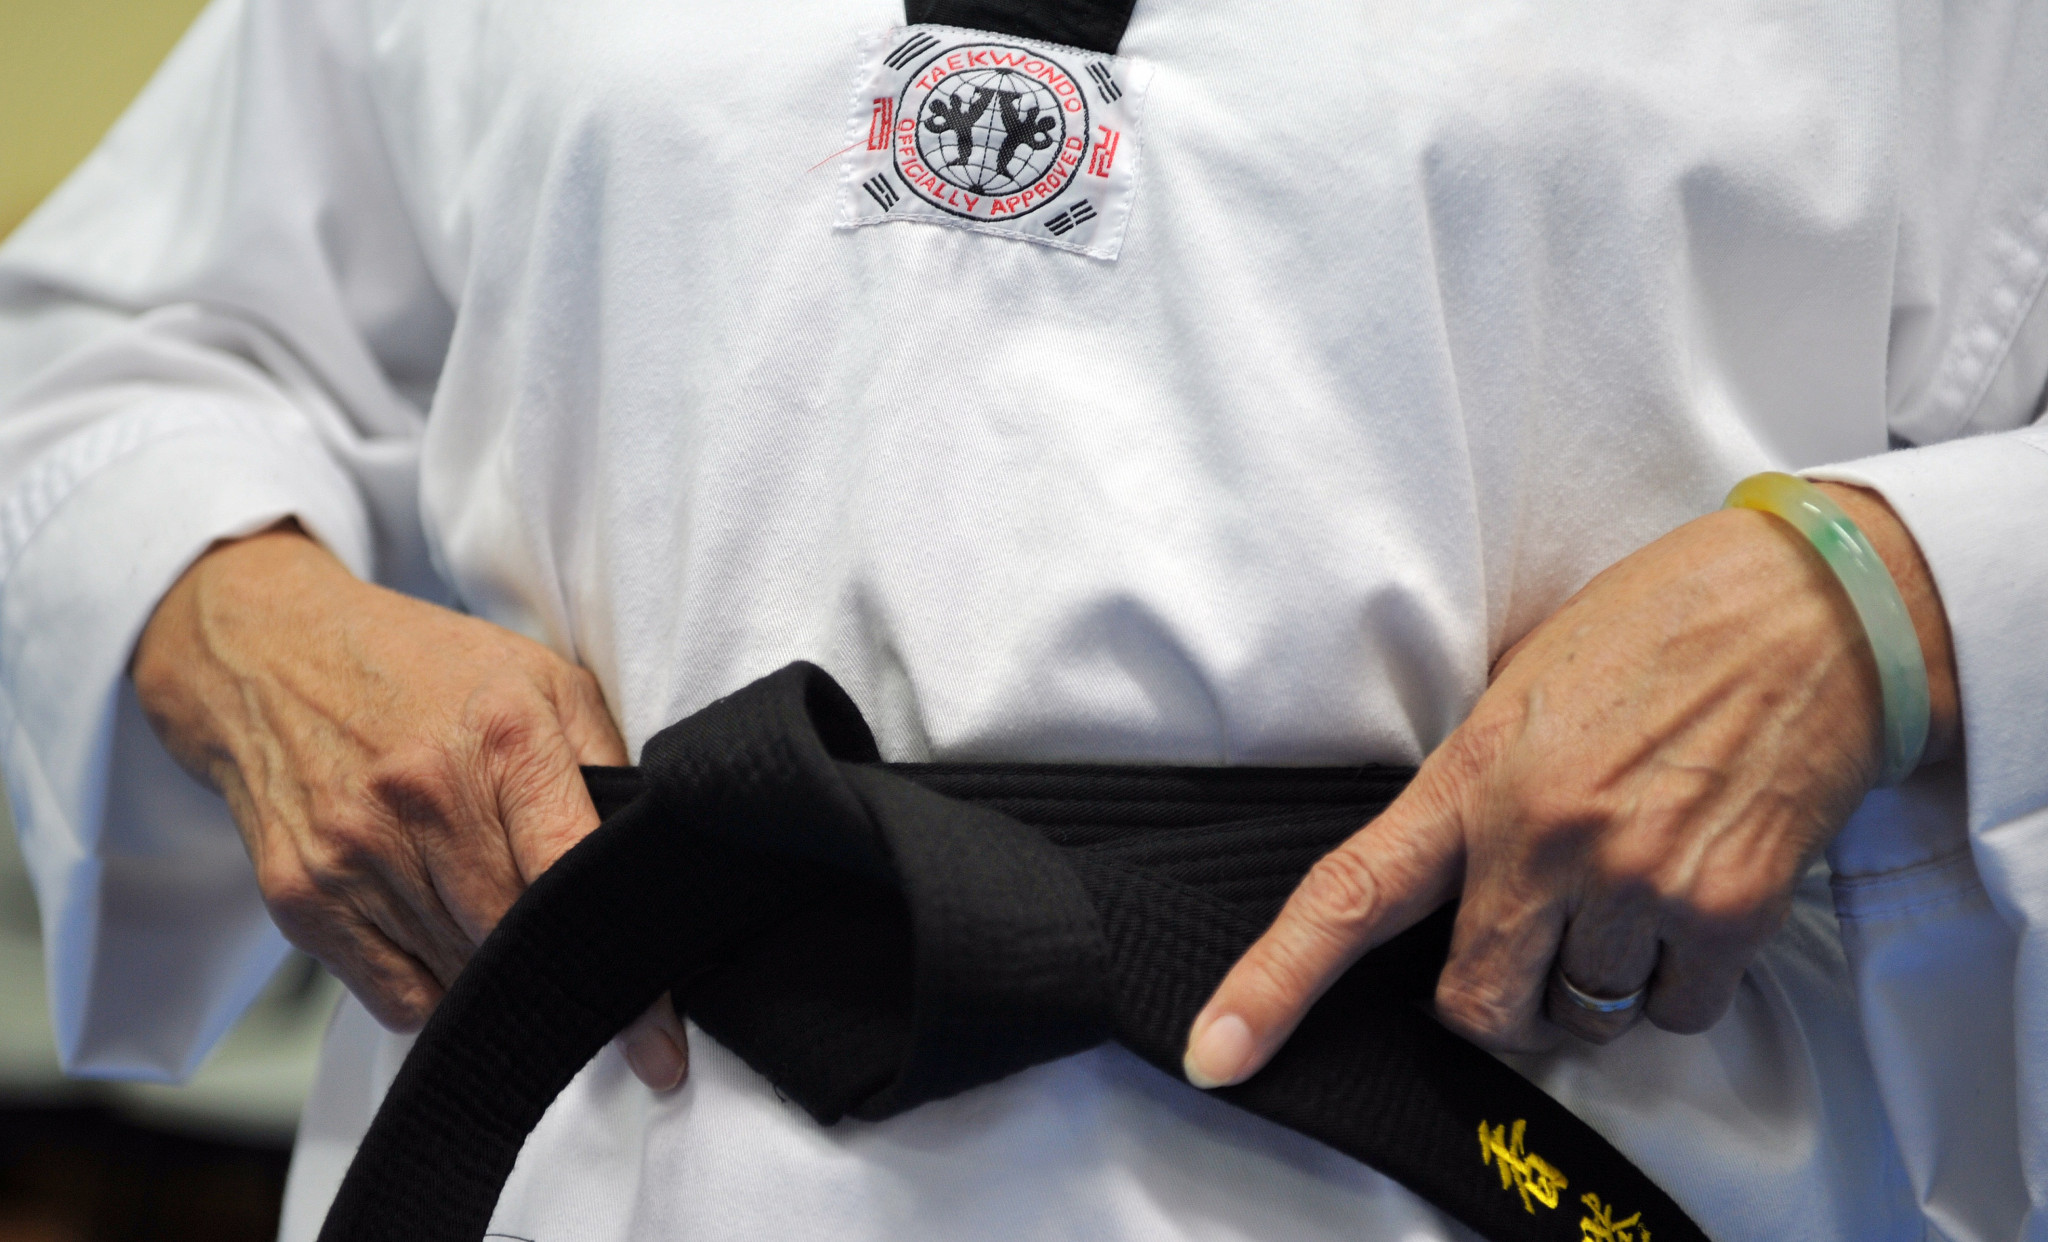 Athletes must go through nine other ranks before being awarded the black belt ©Getty Images